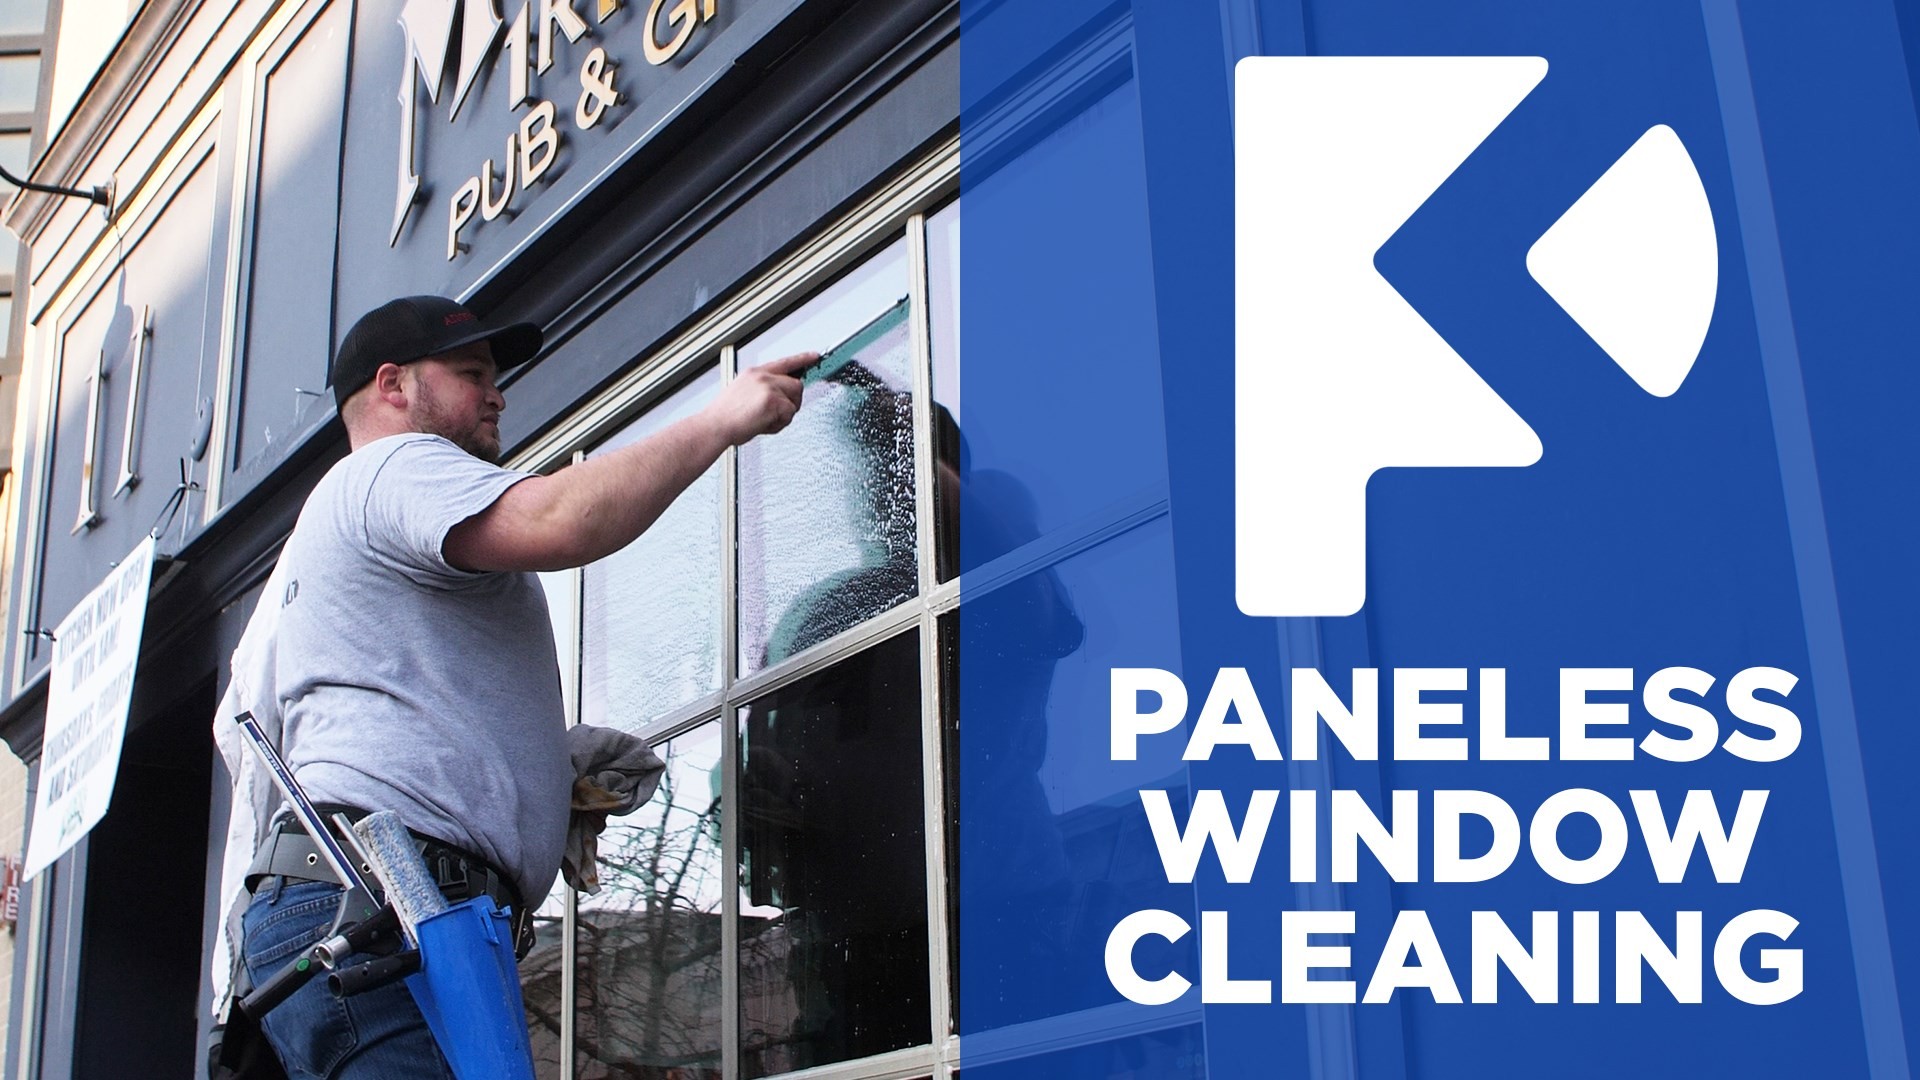 Commercial Window Cleaning for Paneless Window Cleaning LLC in Iowa City, IA